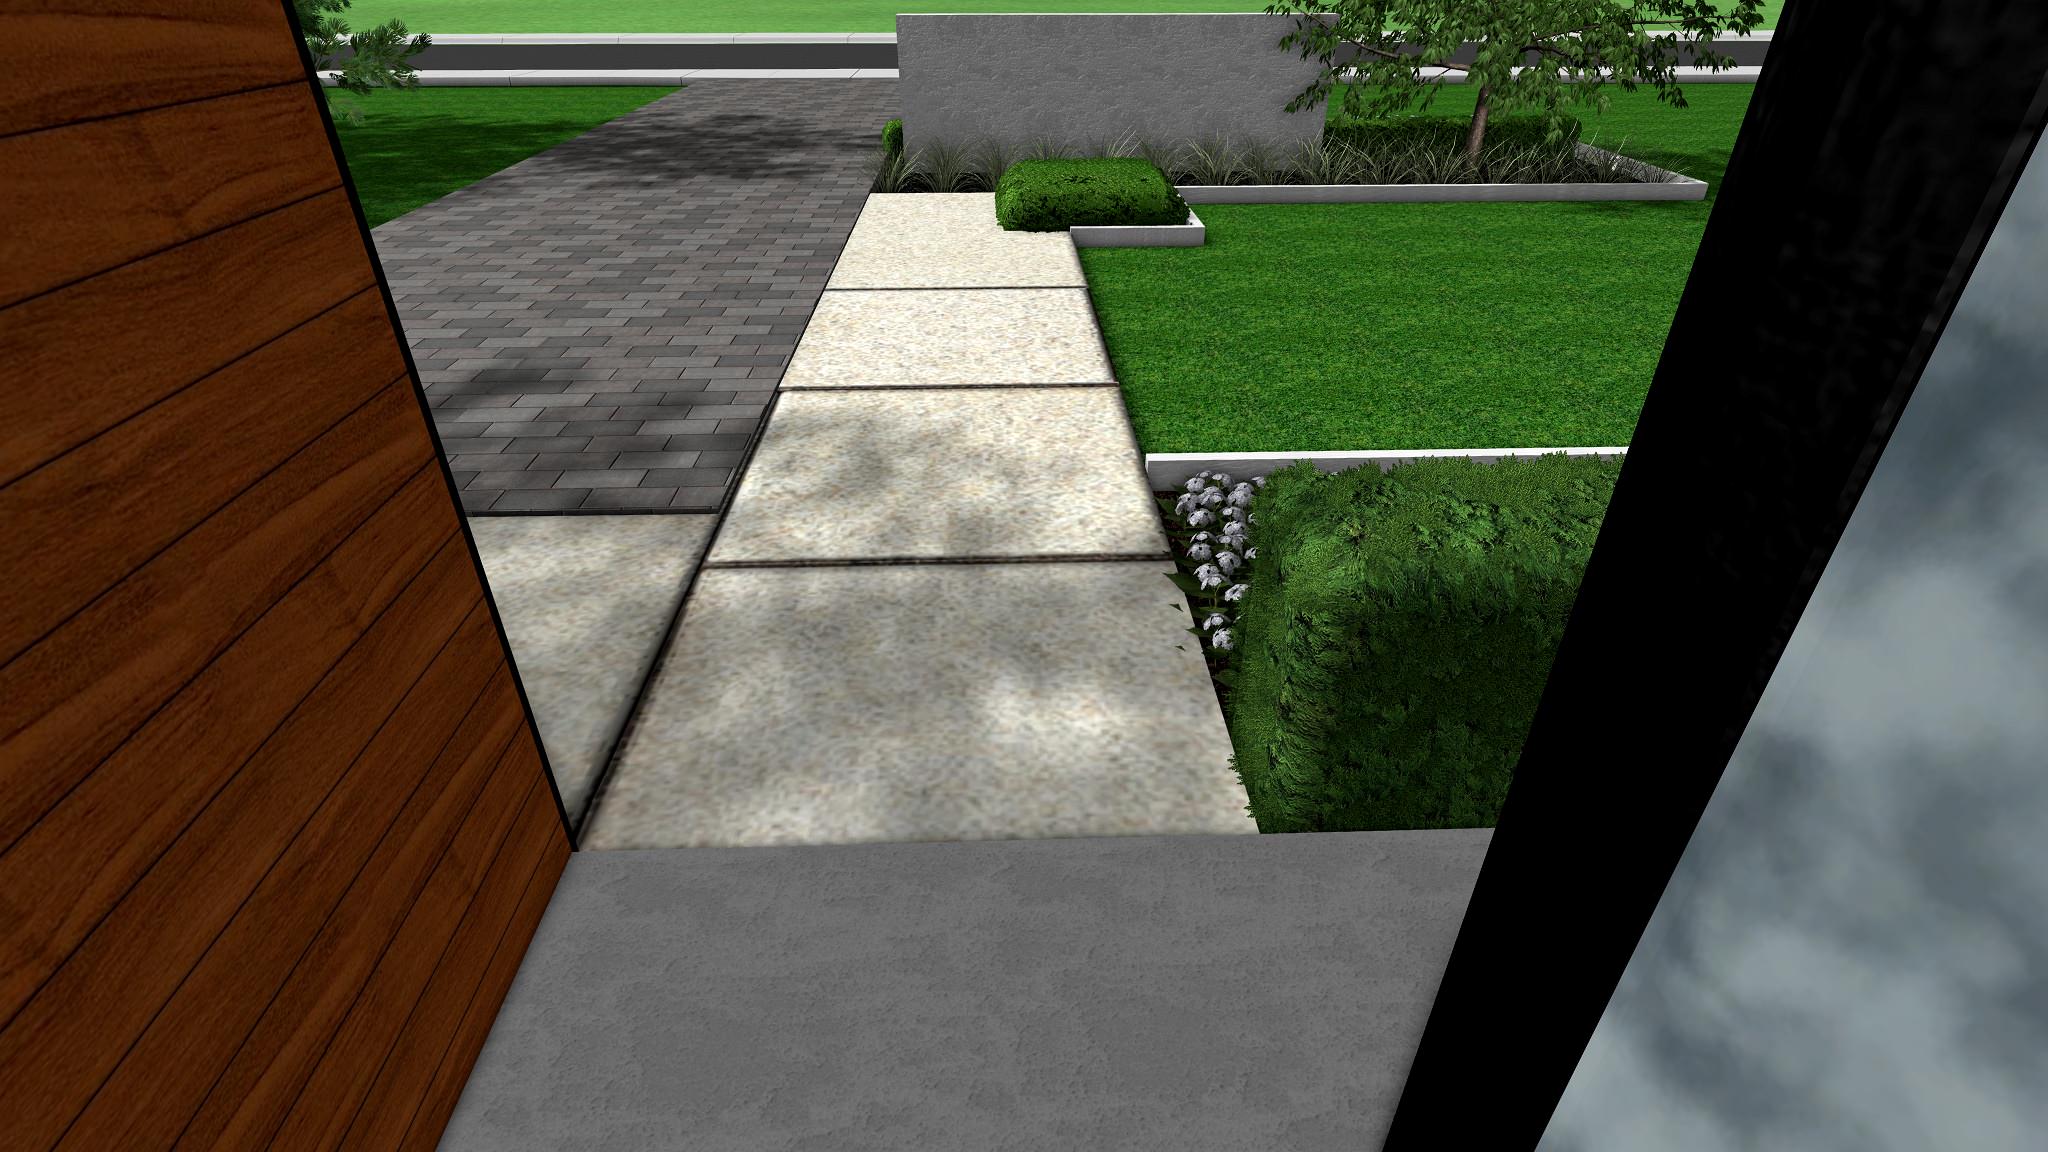 Caledon Contemporary Modern Front Yard